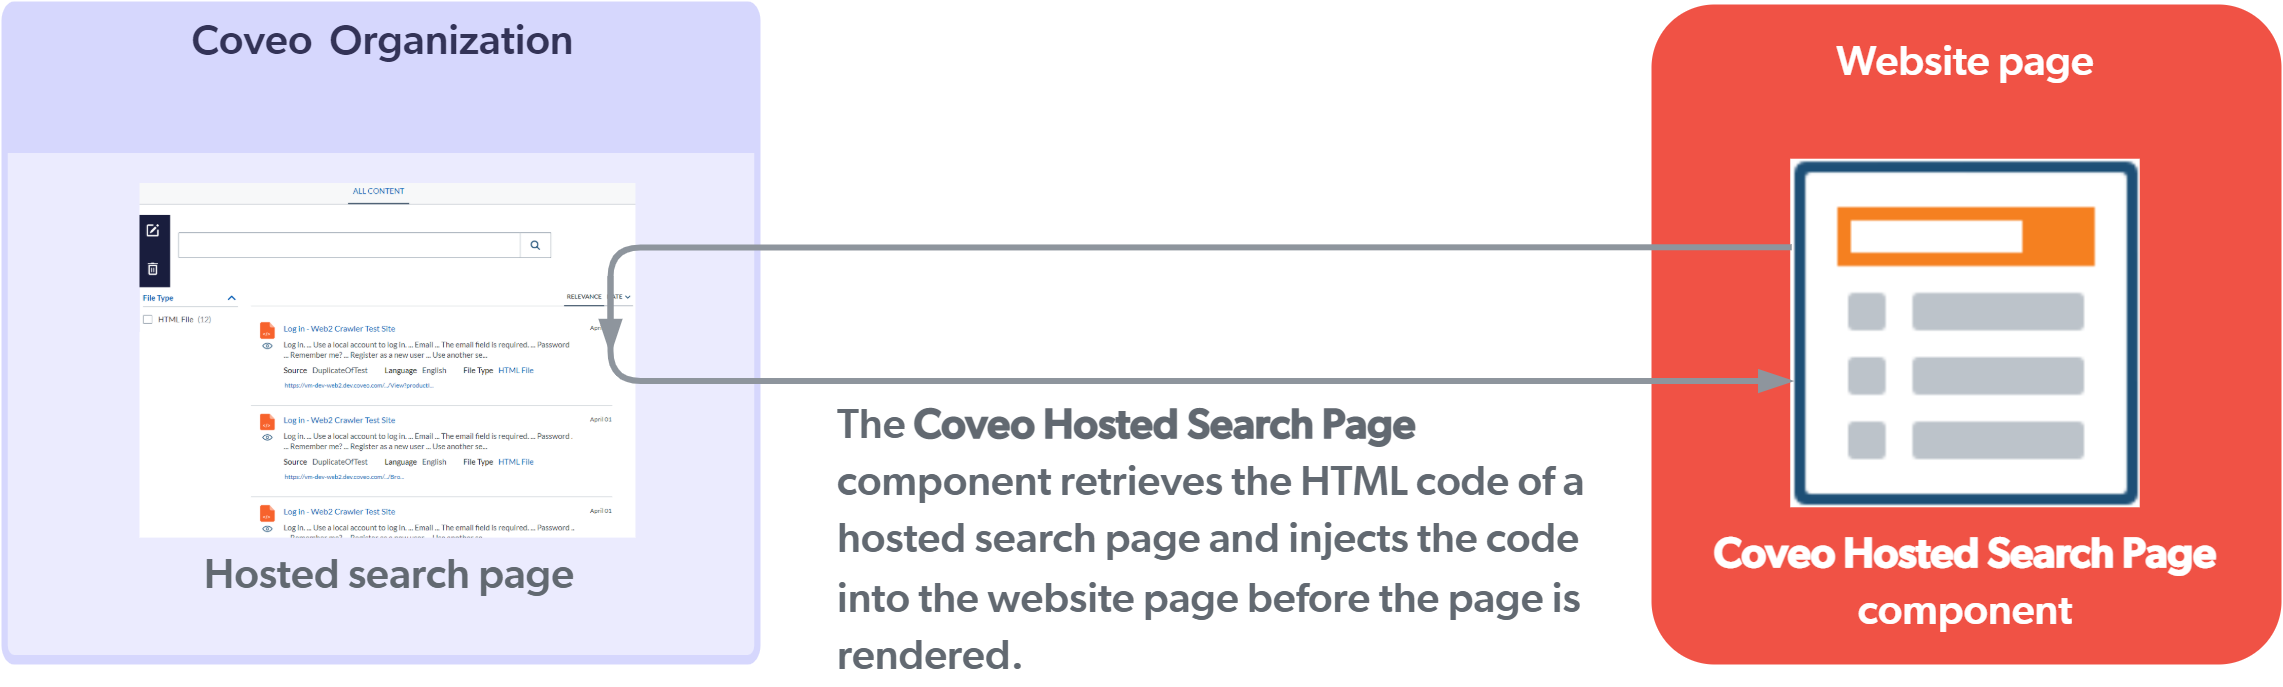 Hosted Search Page and Coveo Hosted Search Page component relationship